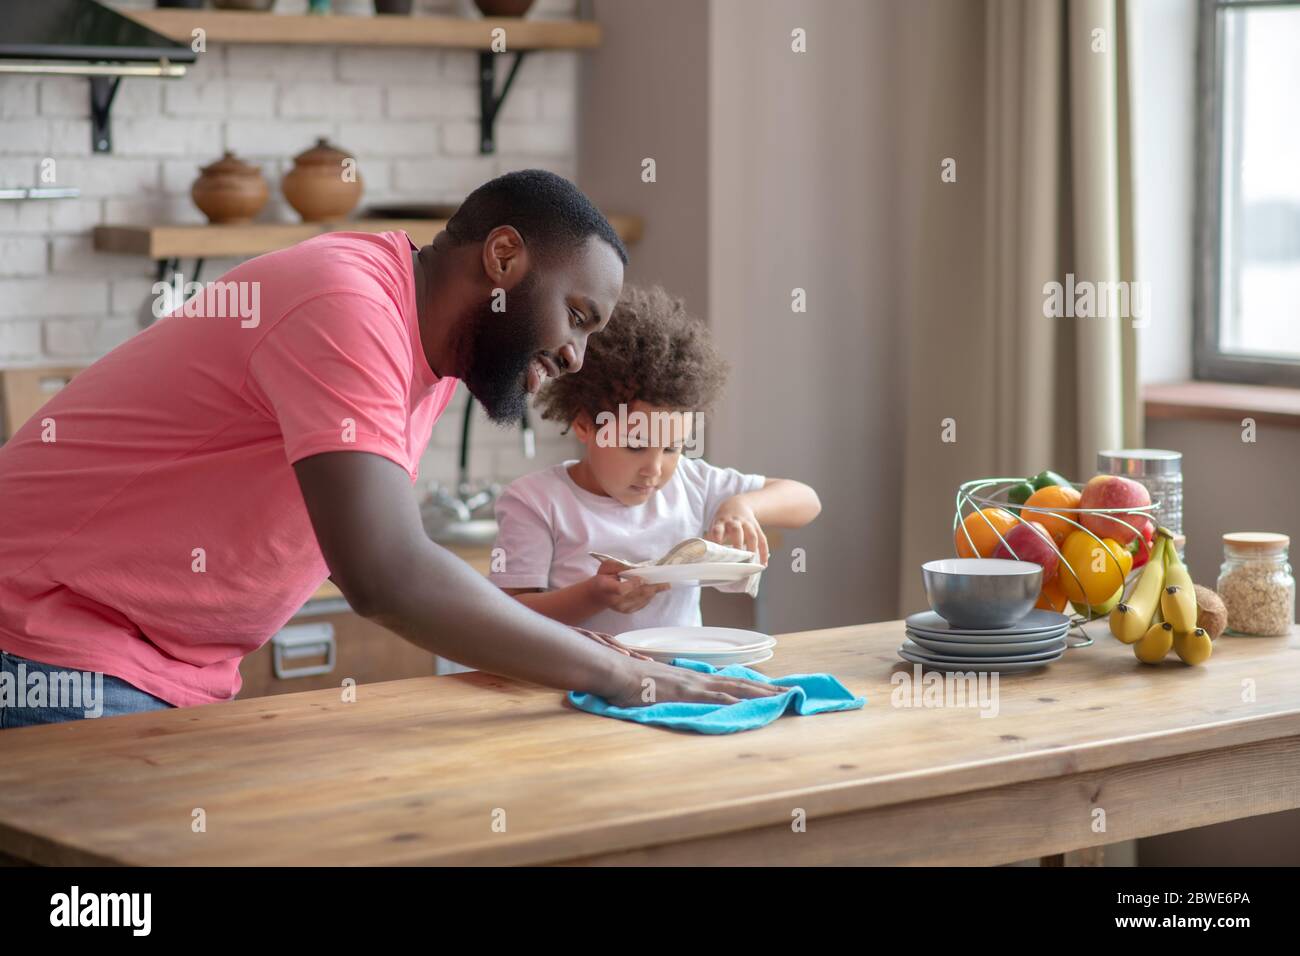 Tall dark-skinned man in a pink tshirt wiping the table and smiling, his daughter wiping the plate Stock Photo